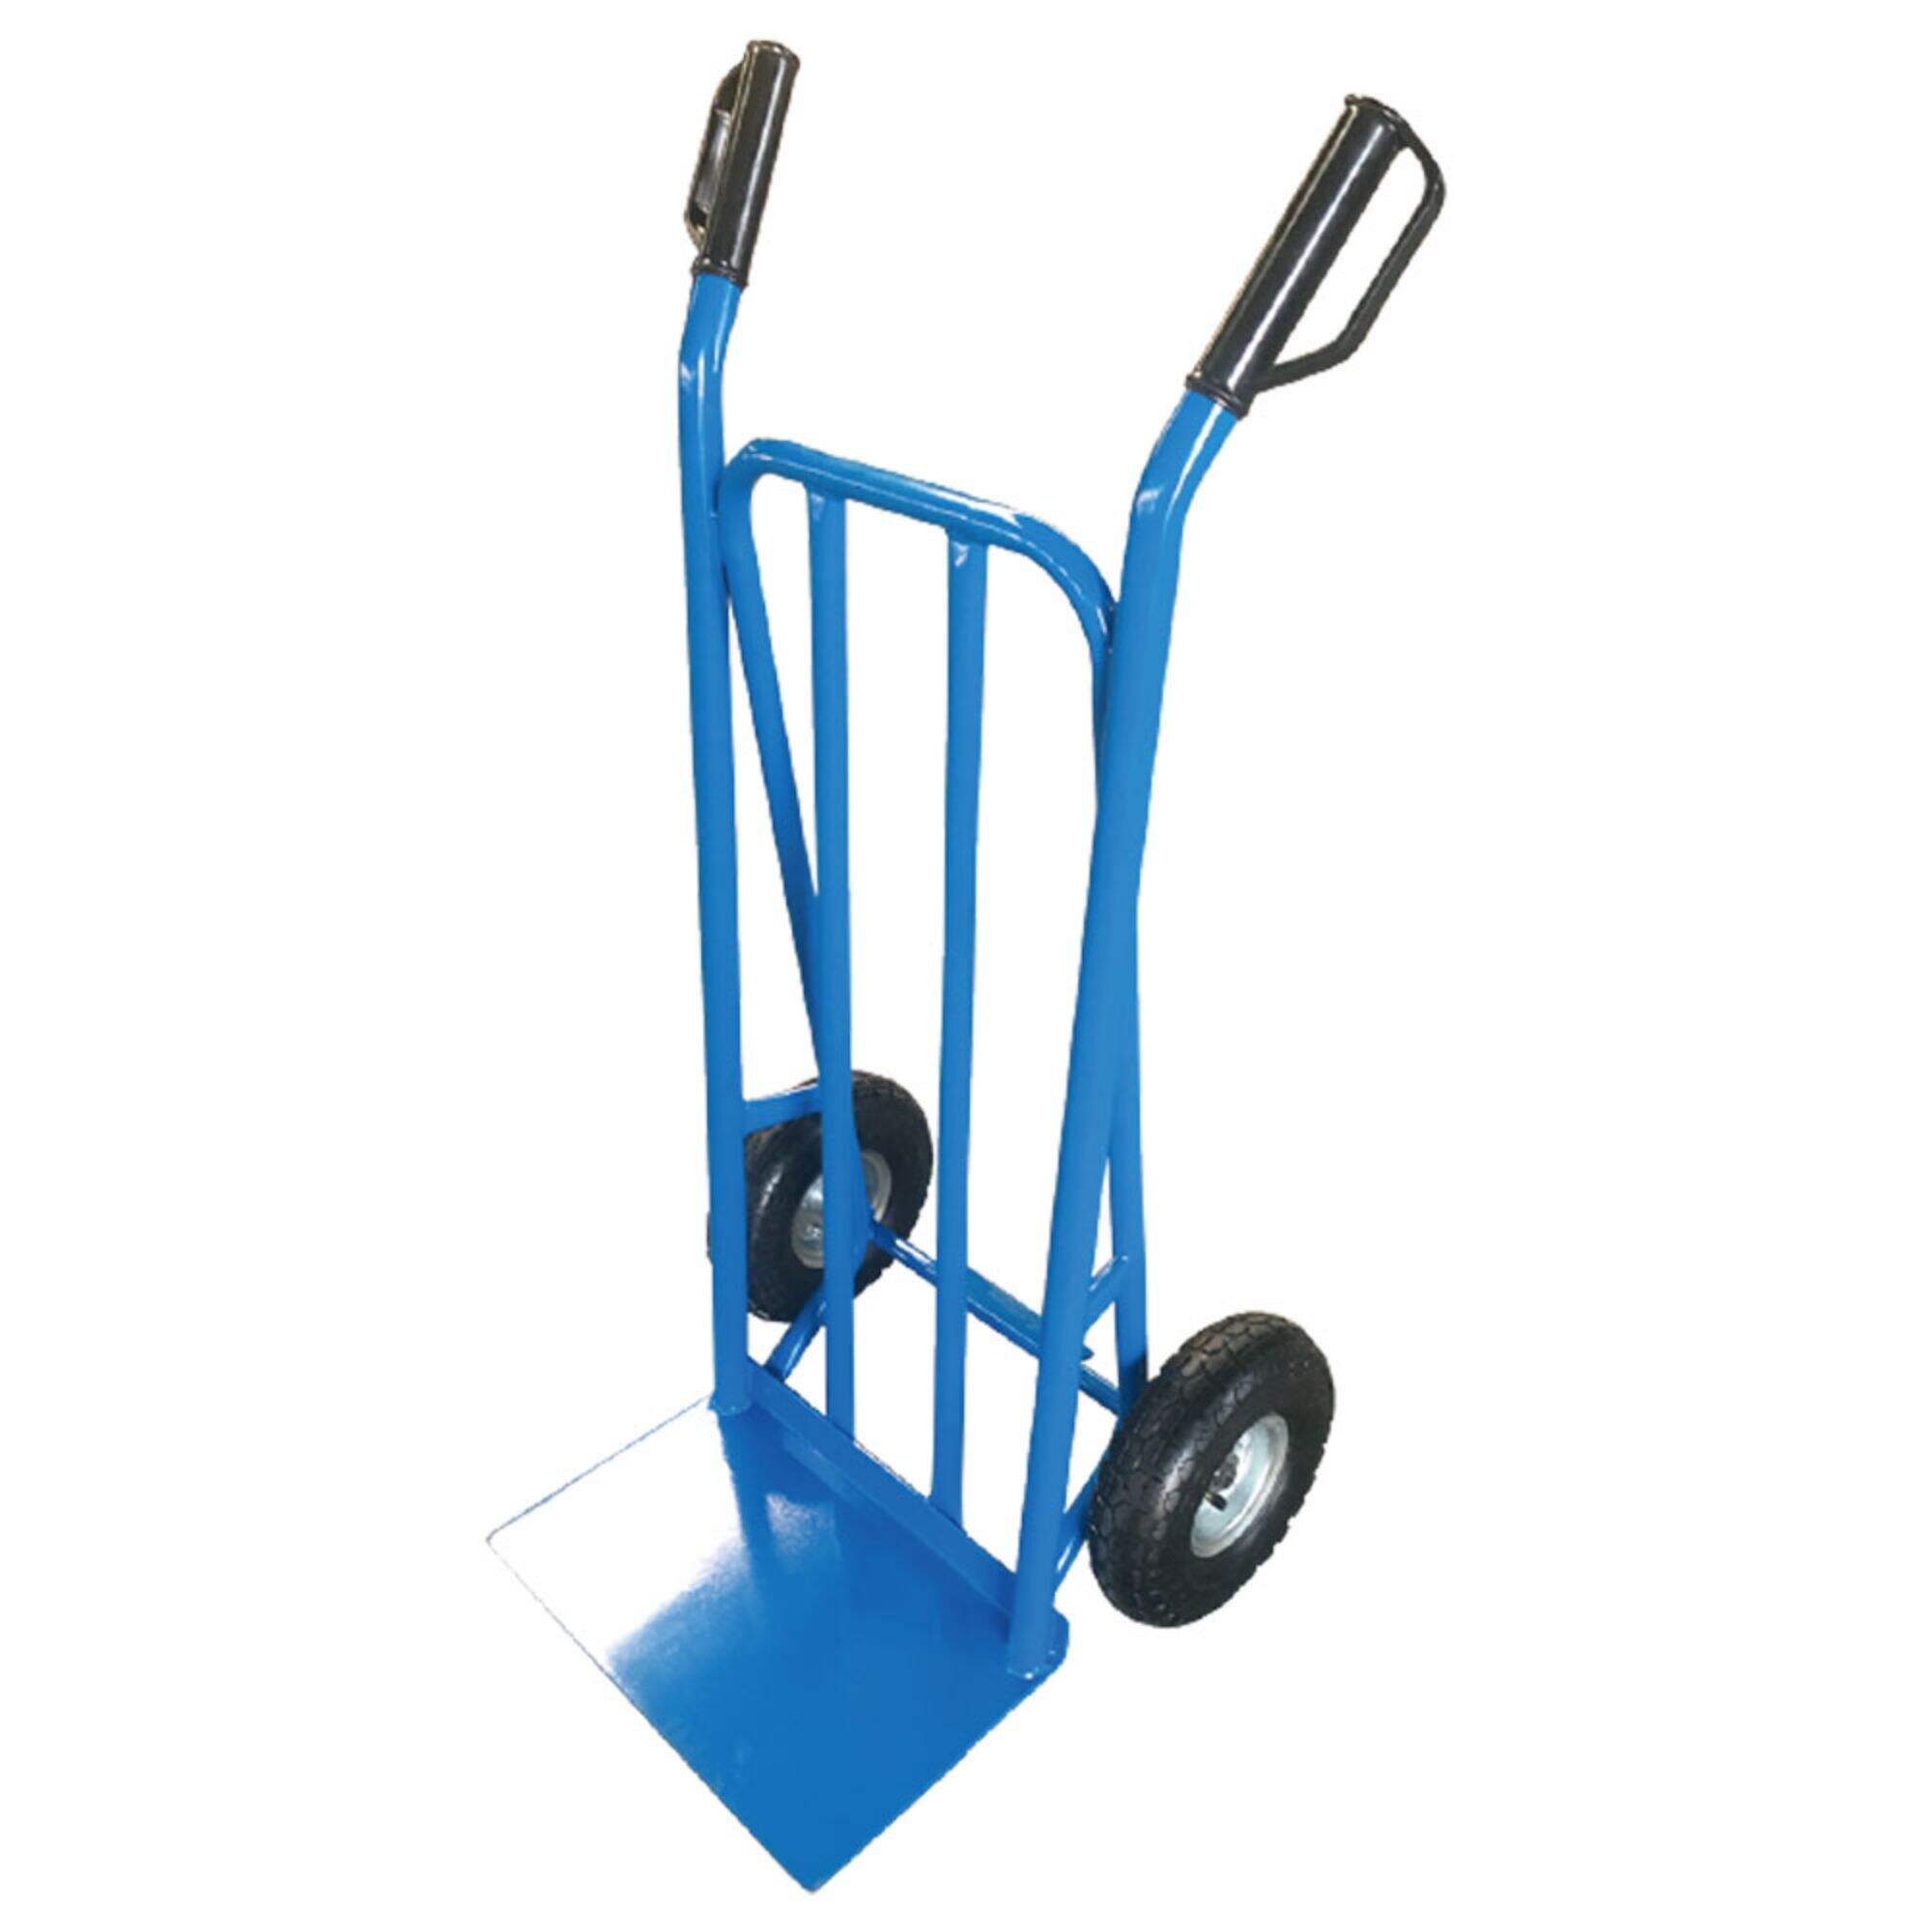 HT2132B Hand Truck, Steel Hand Cart Trolley Dolly, with 10inch 4.10/3.50-4 Pneumatic Wheel